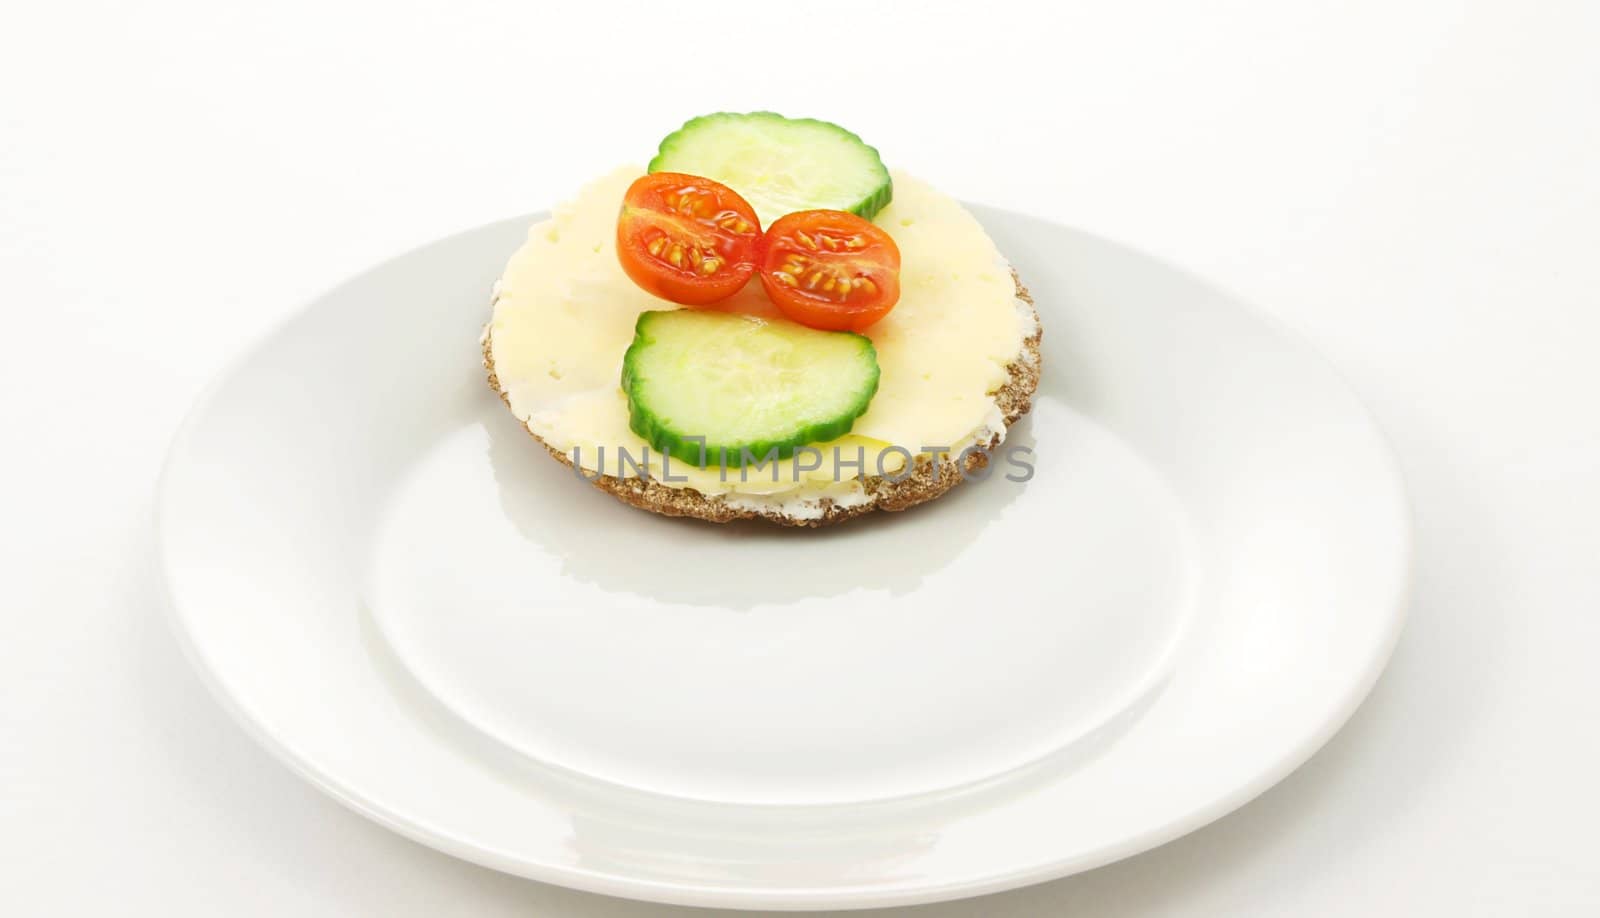 Cracker on plate, with tomato and cucumber, white background